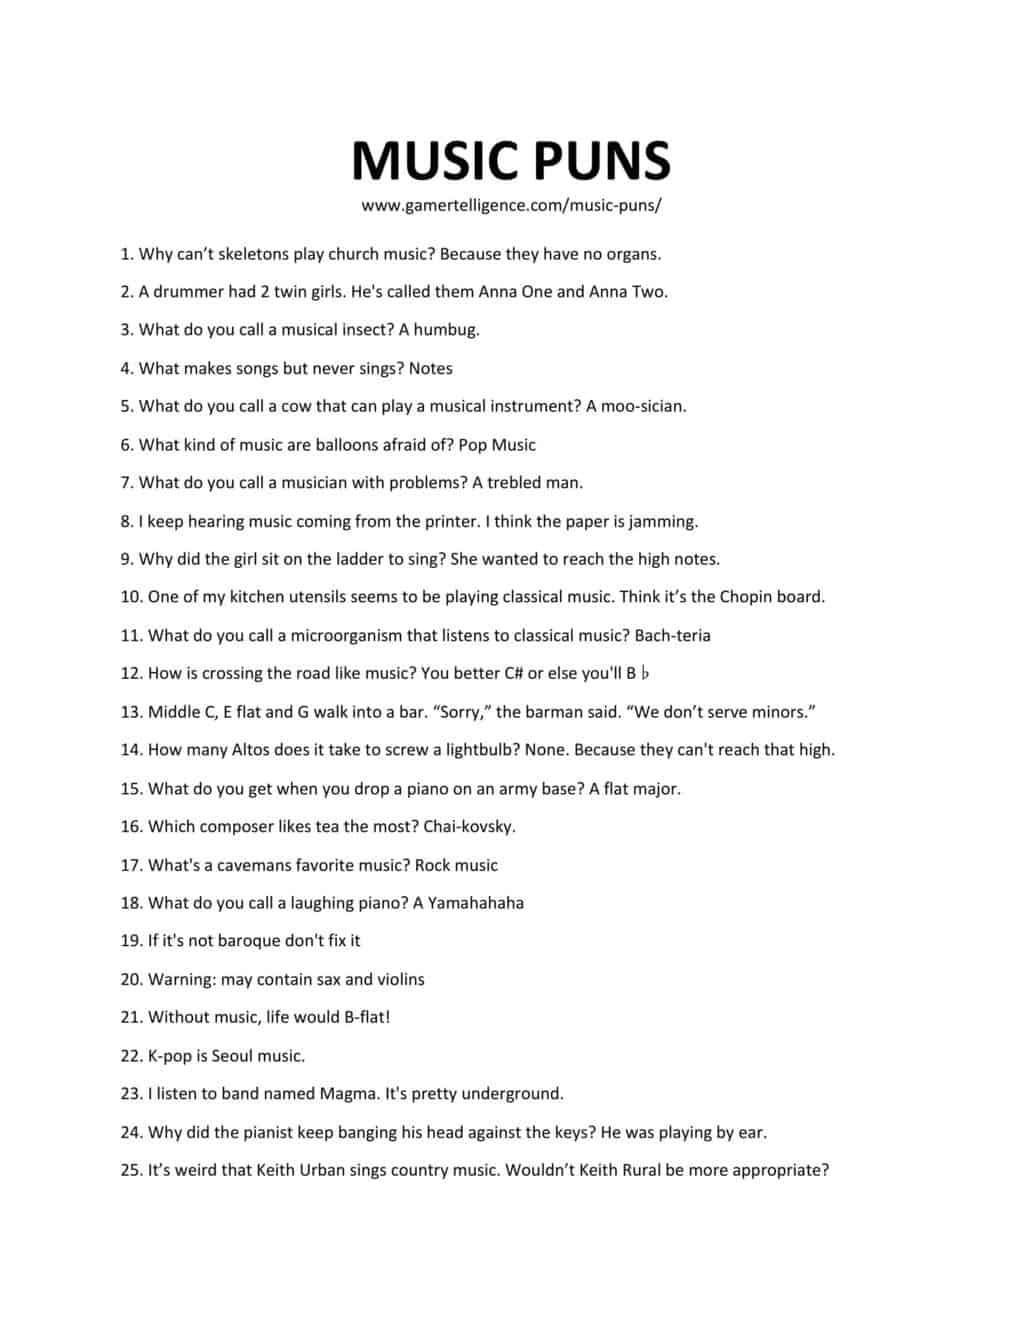 Downloadable and printable list of music puns as jpg or pdf